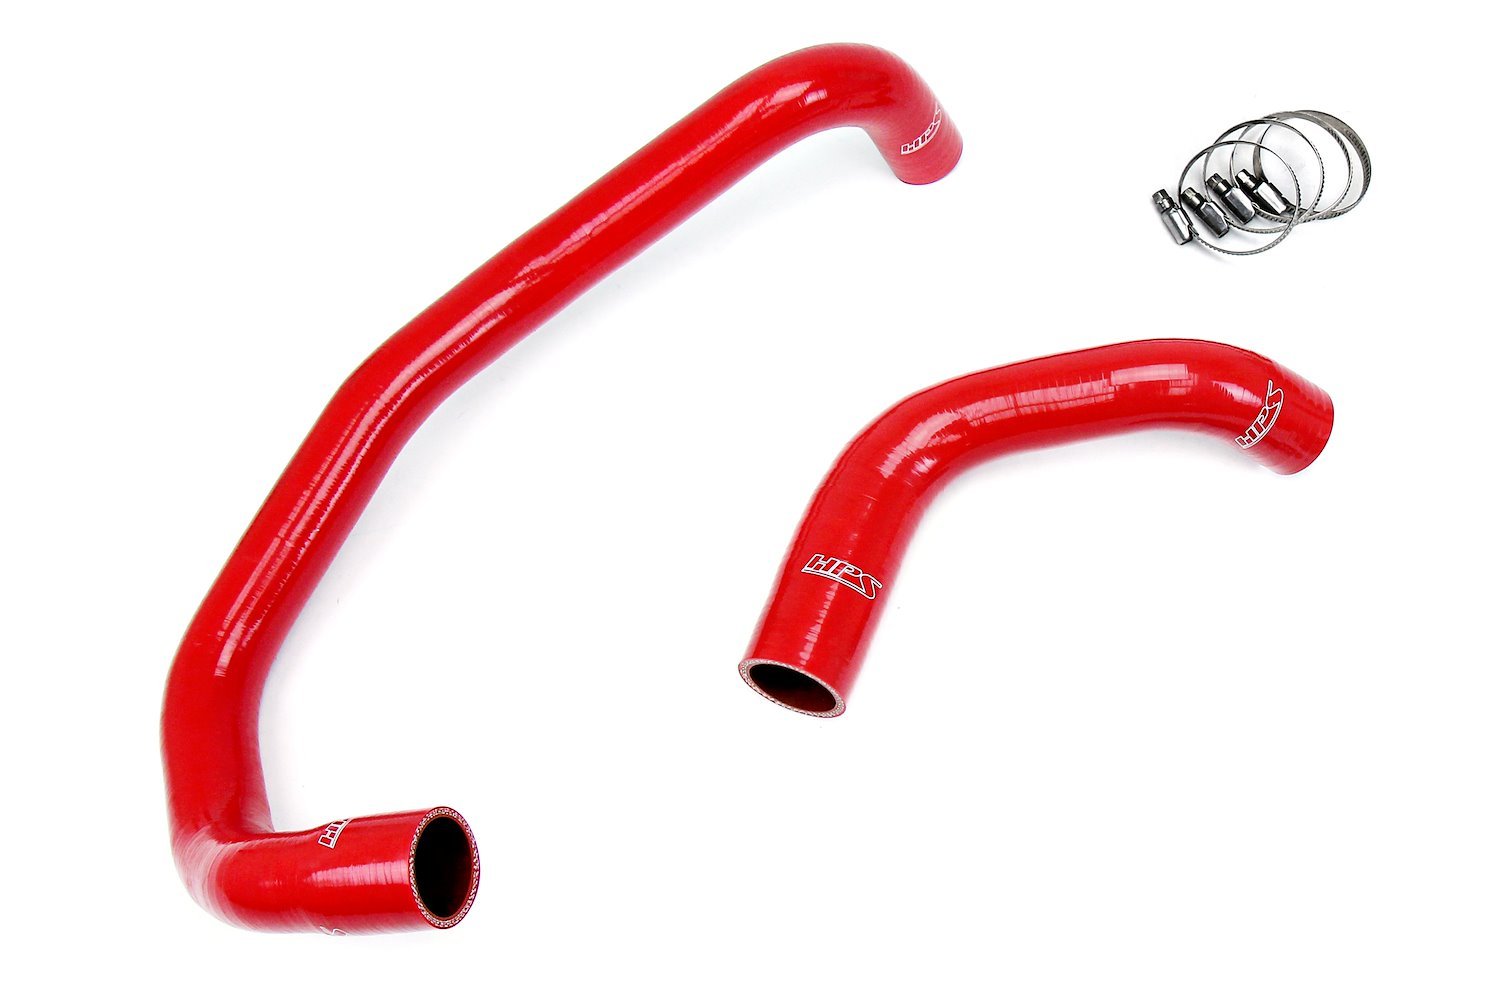 57-1326R-RED Radiator Hose Kit, High-Temp 3-Ply Reinforced Silicone, Replaces OEM Rubber Radiator Coolant Hoses